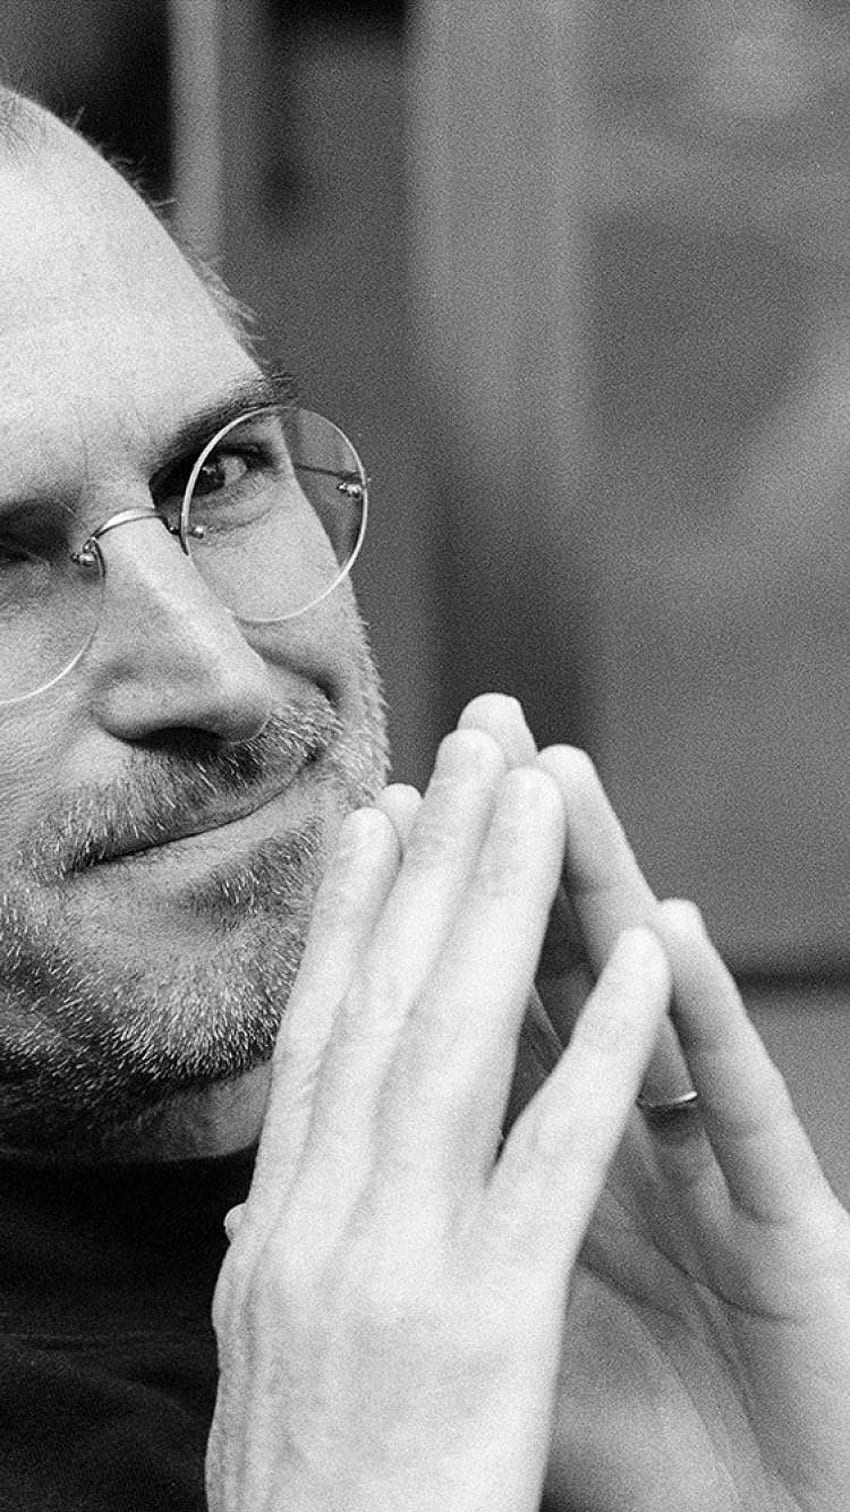 Steve Jobs Once Tossed the Original iPhone Across a Room to Impress  Journalists  MacRumors